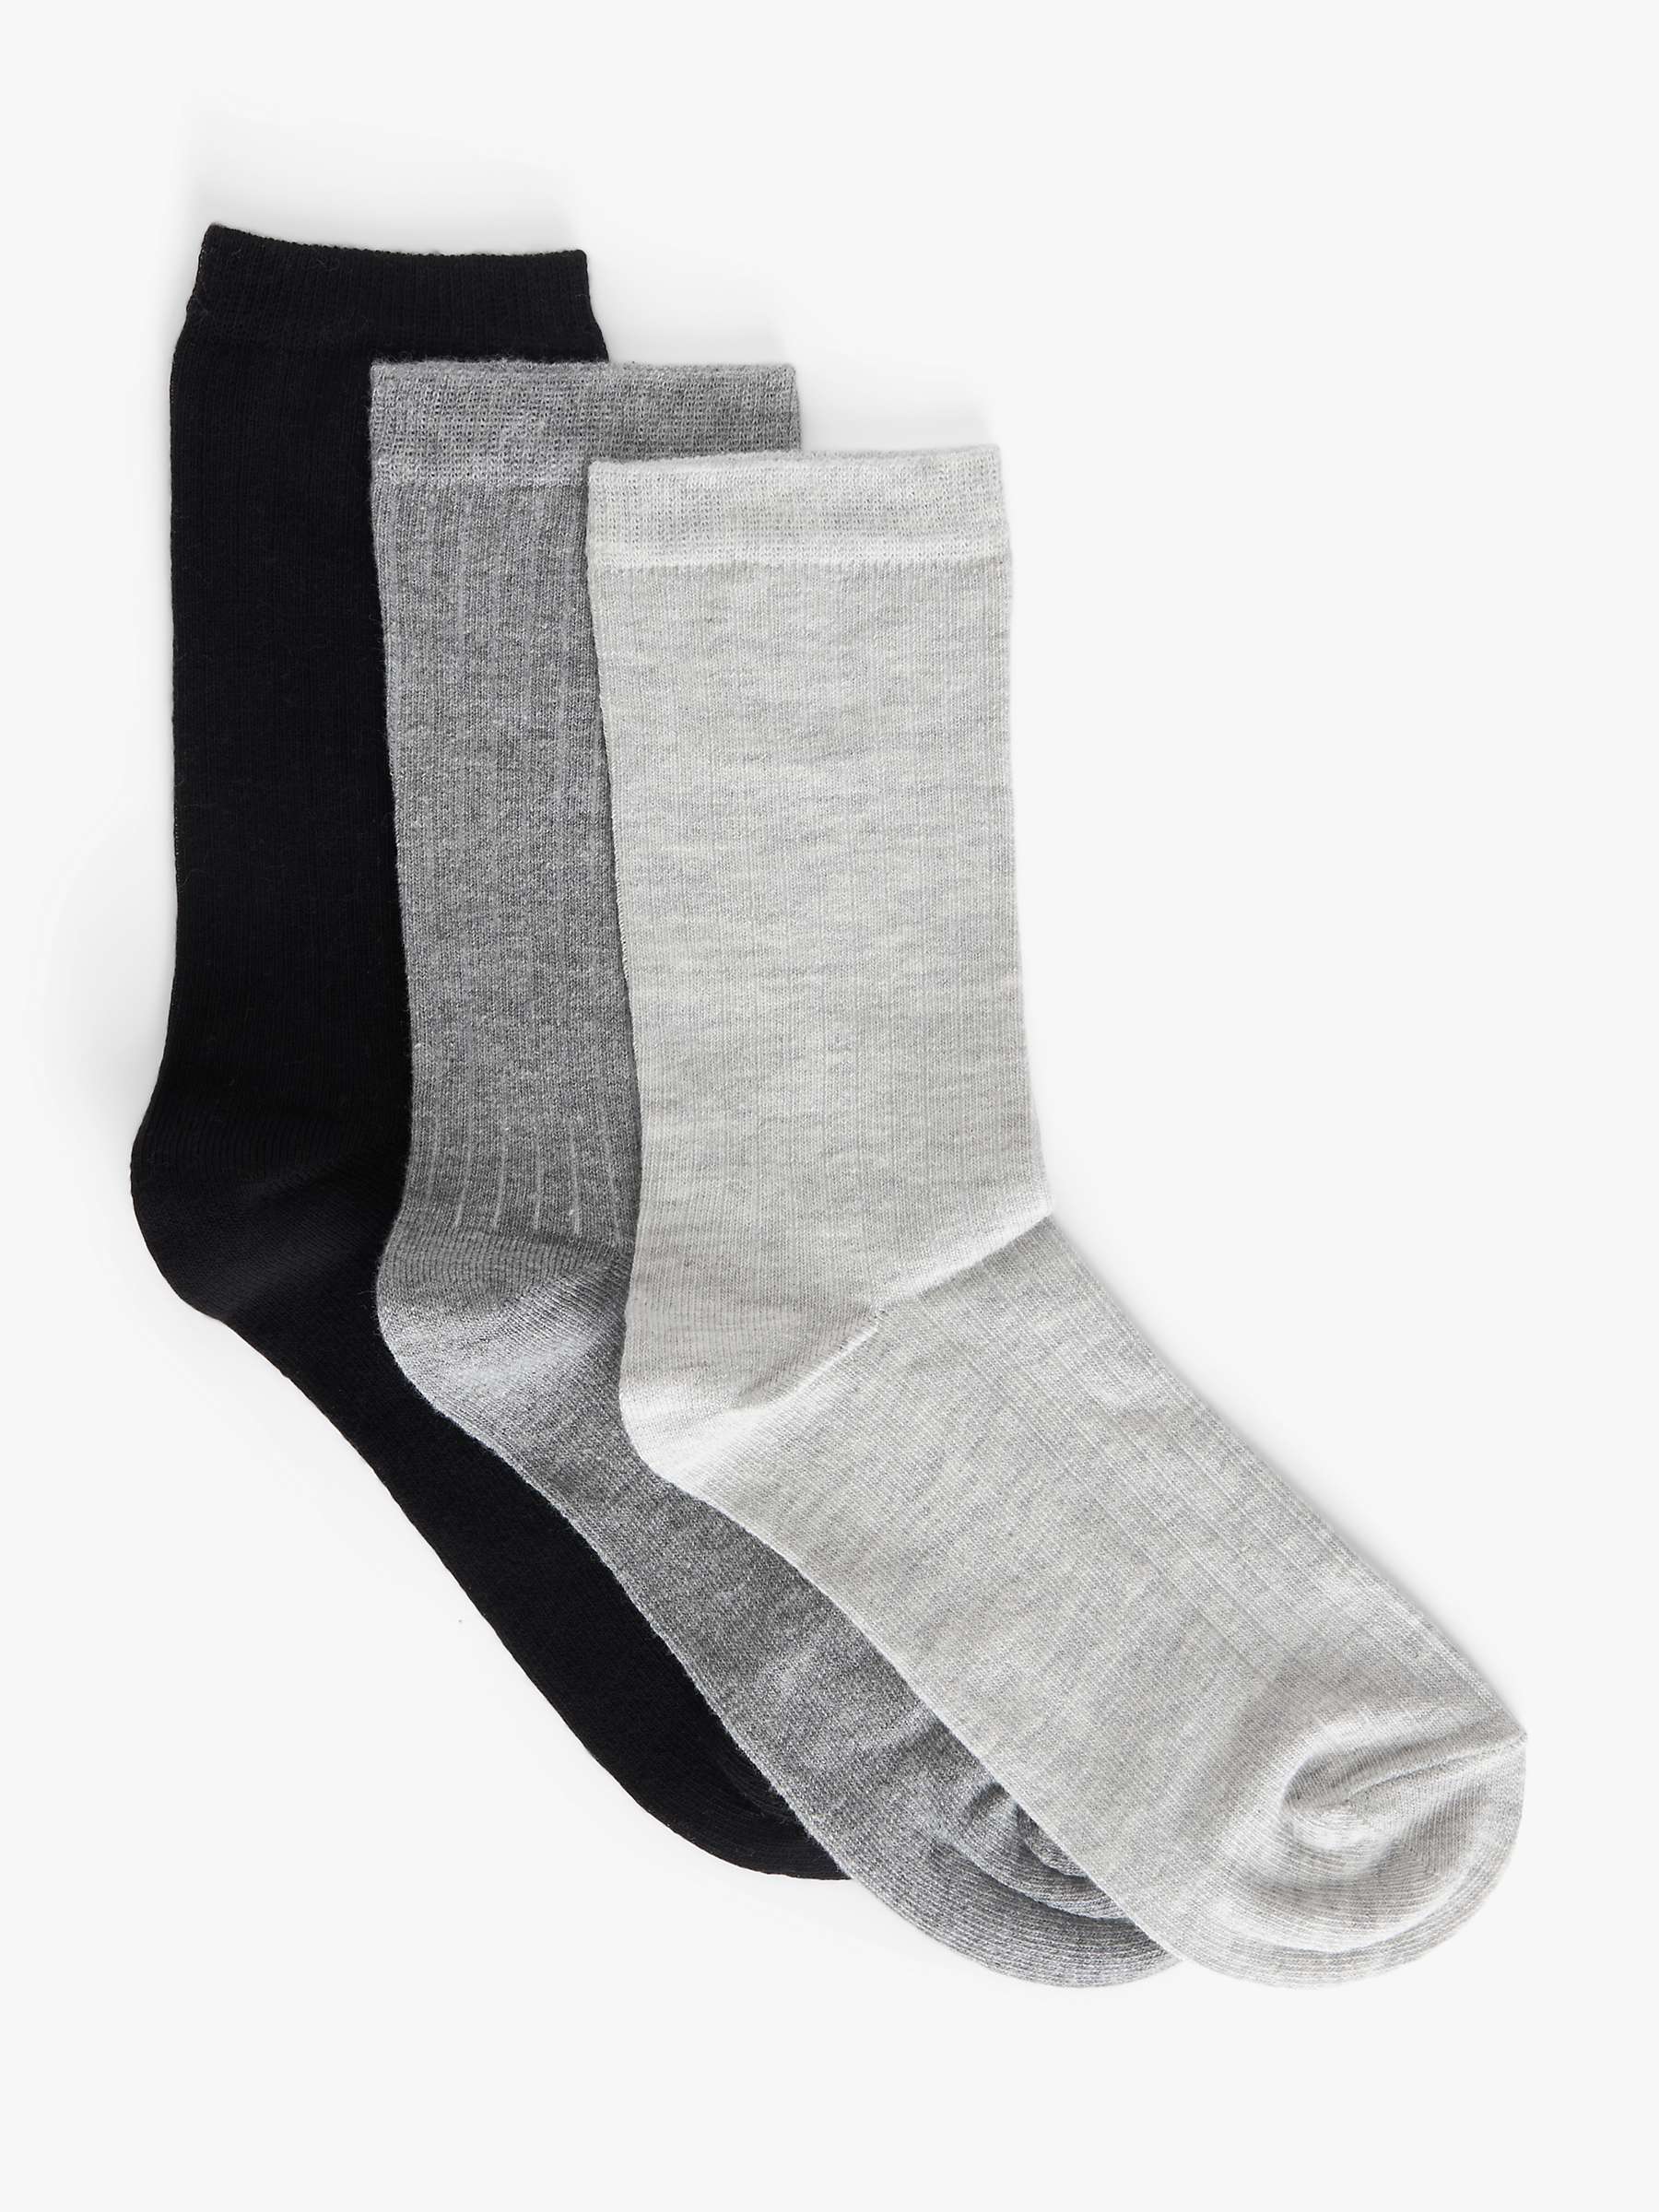 Buy John Lewis Ribbed Organic Cotton Mix Ankle Socks, Pack of 3 Online at johnlewis.com